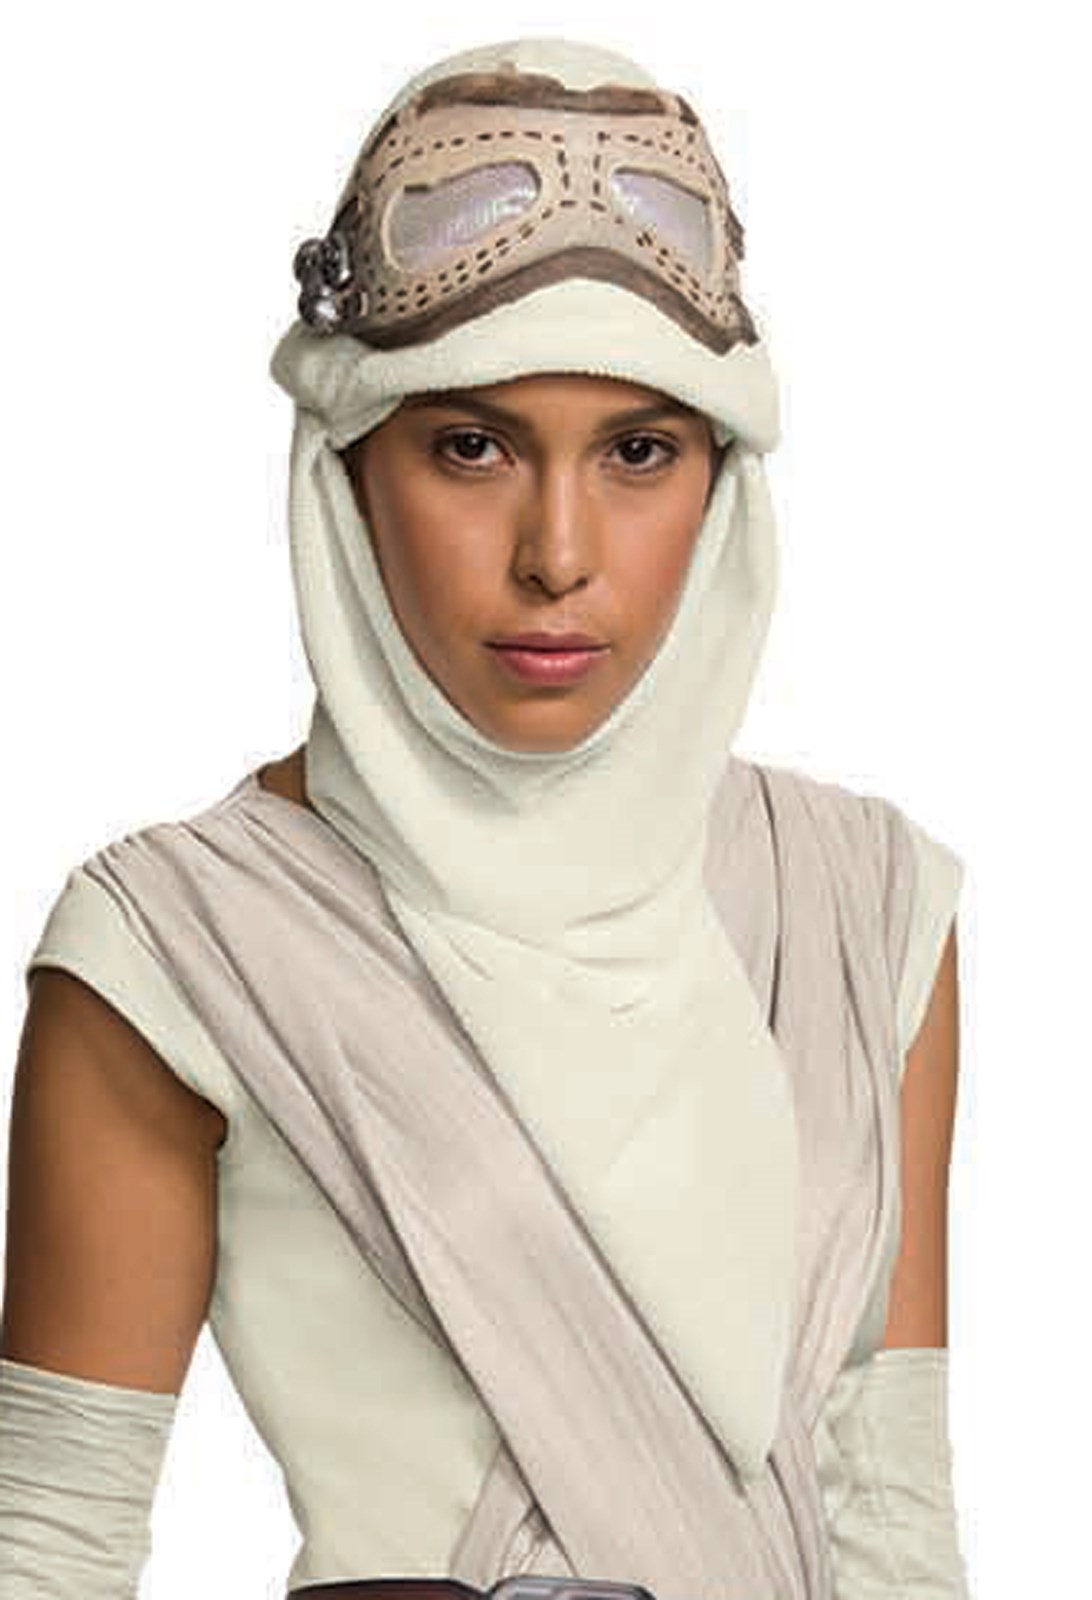 Star Wars:  The Force Awakens - Rey Adult Eye Mask with Hood